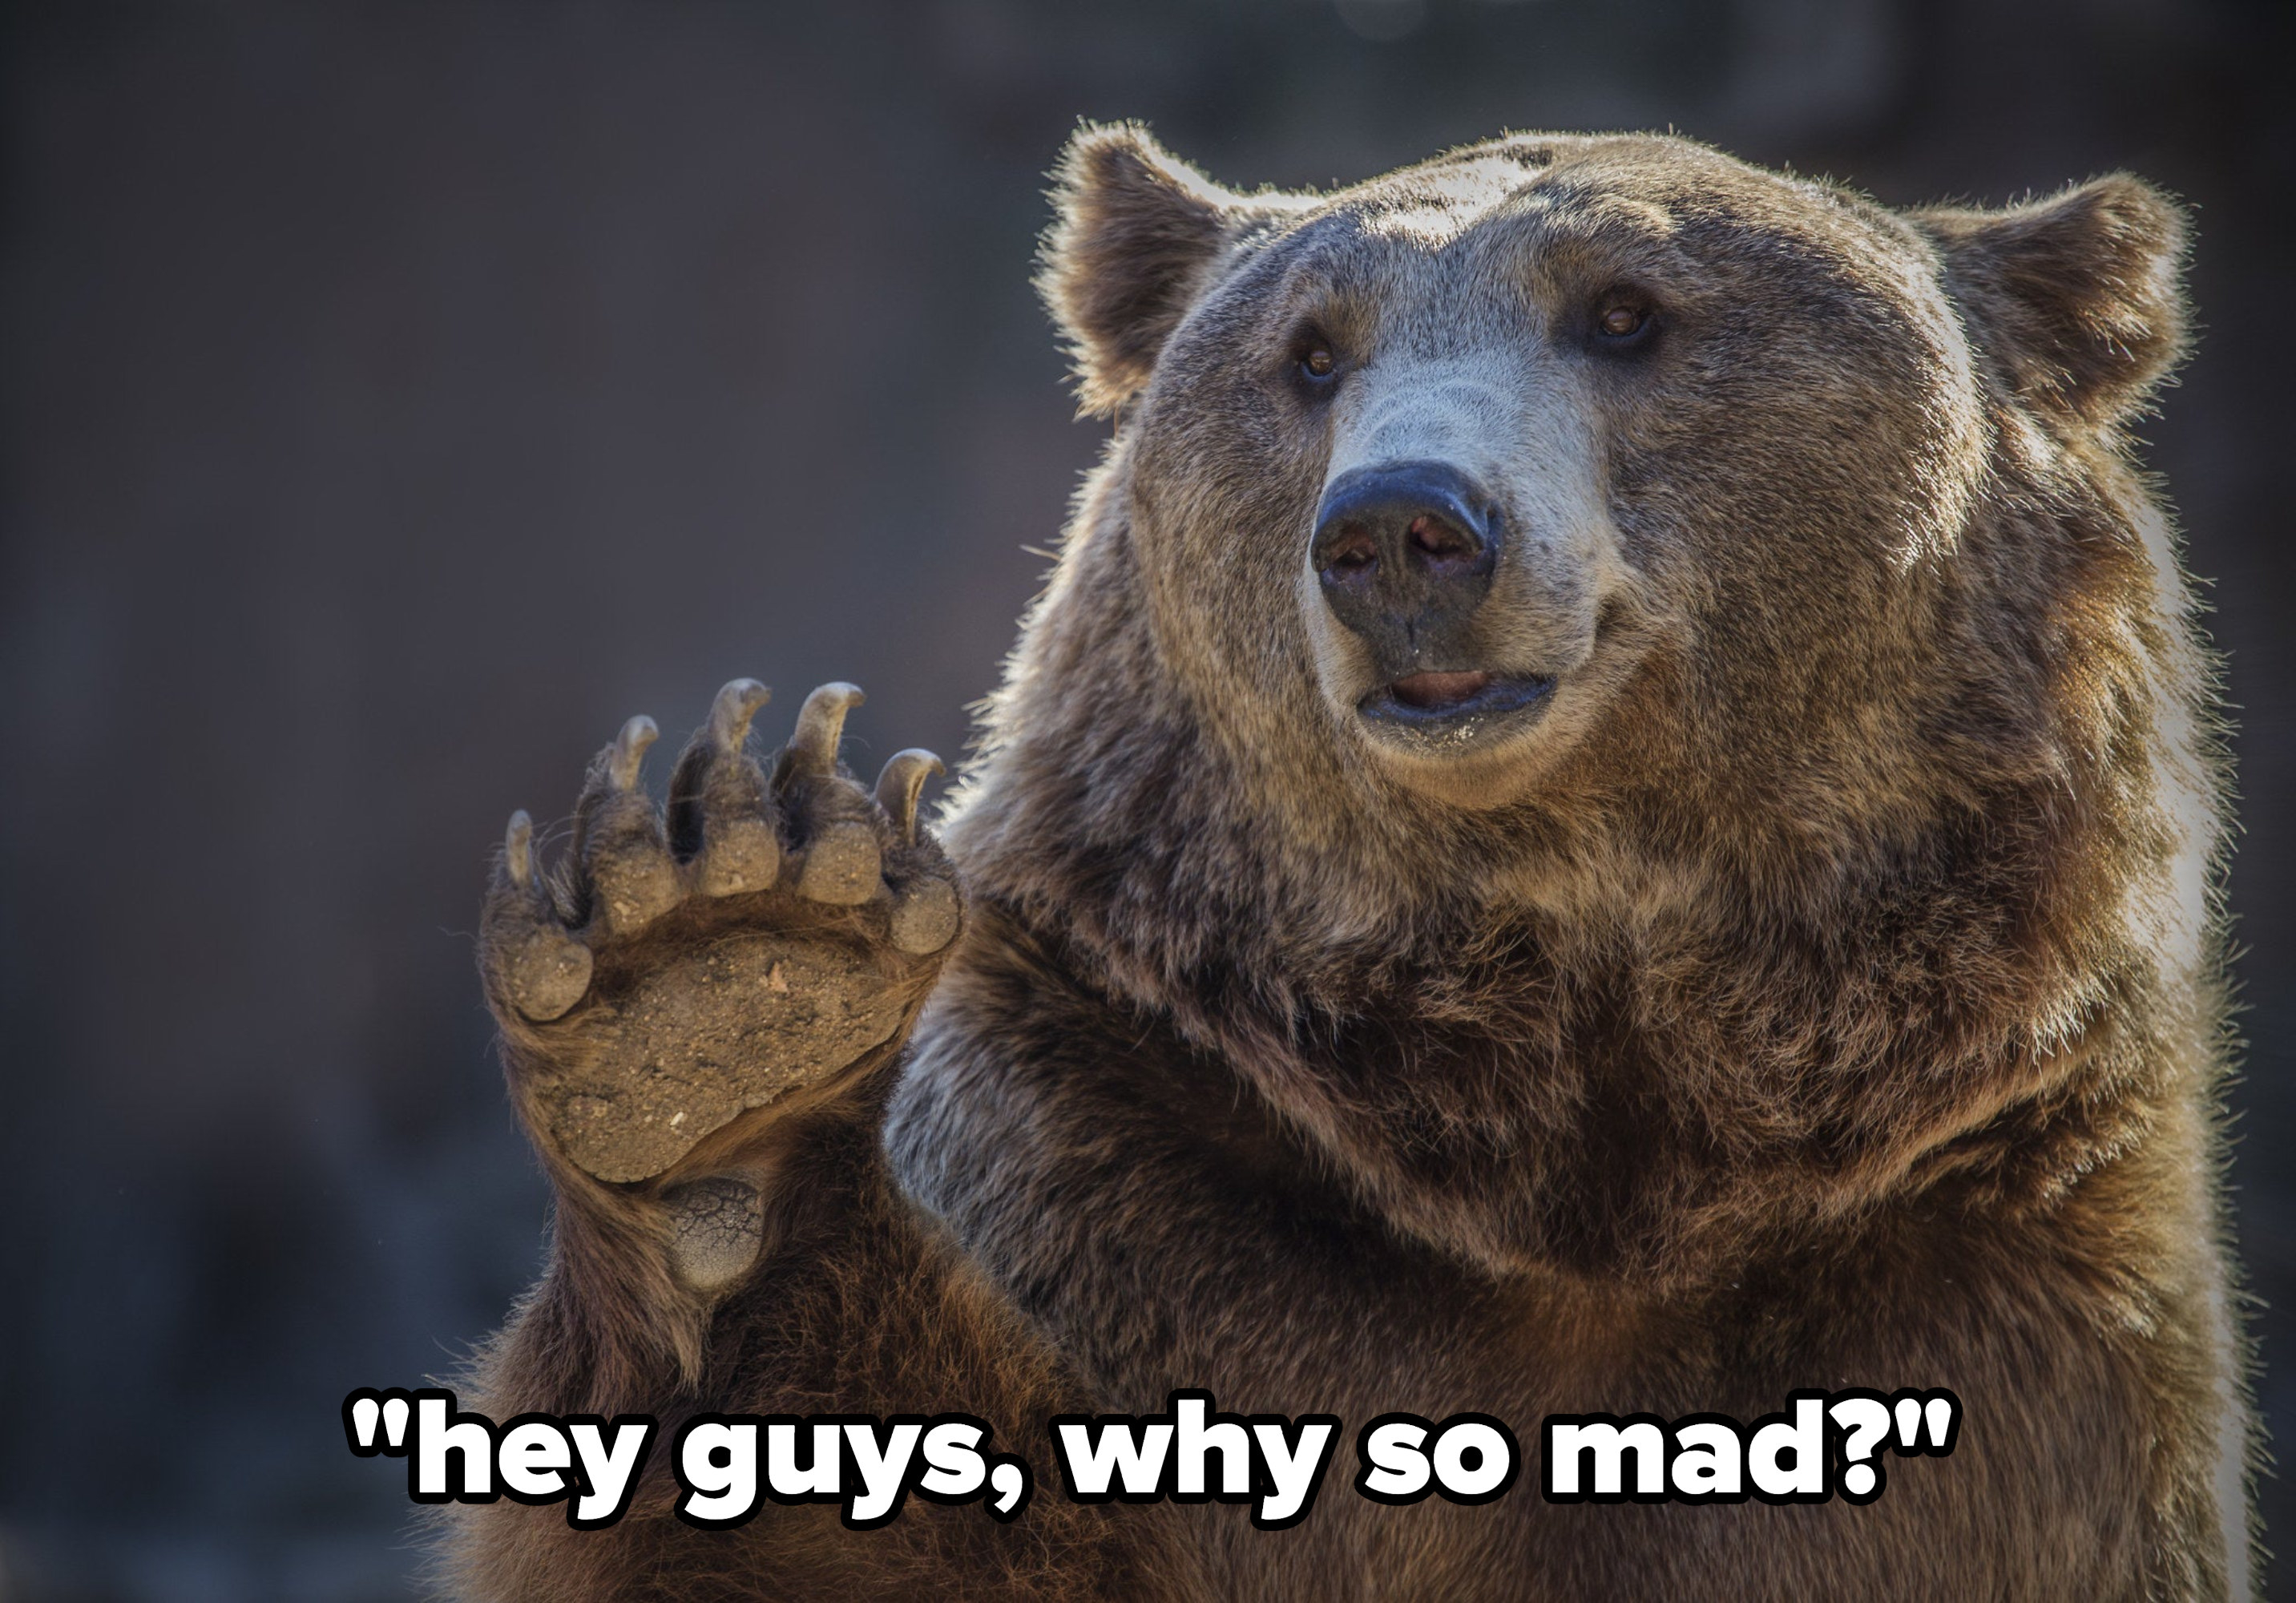 A bear waving, with caption: &quot;hey guys, why so mad?&quot;